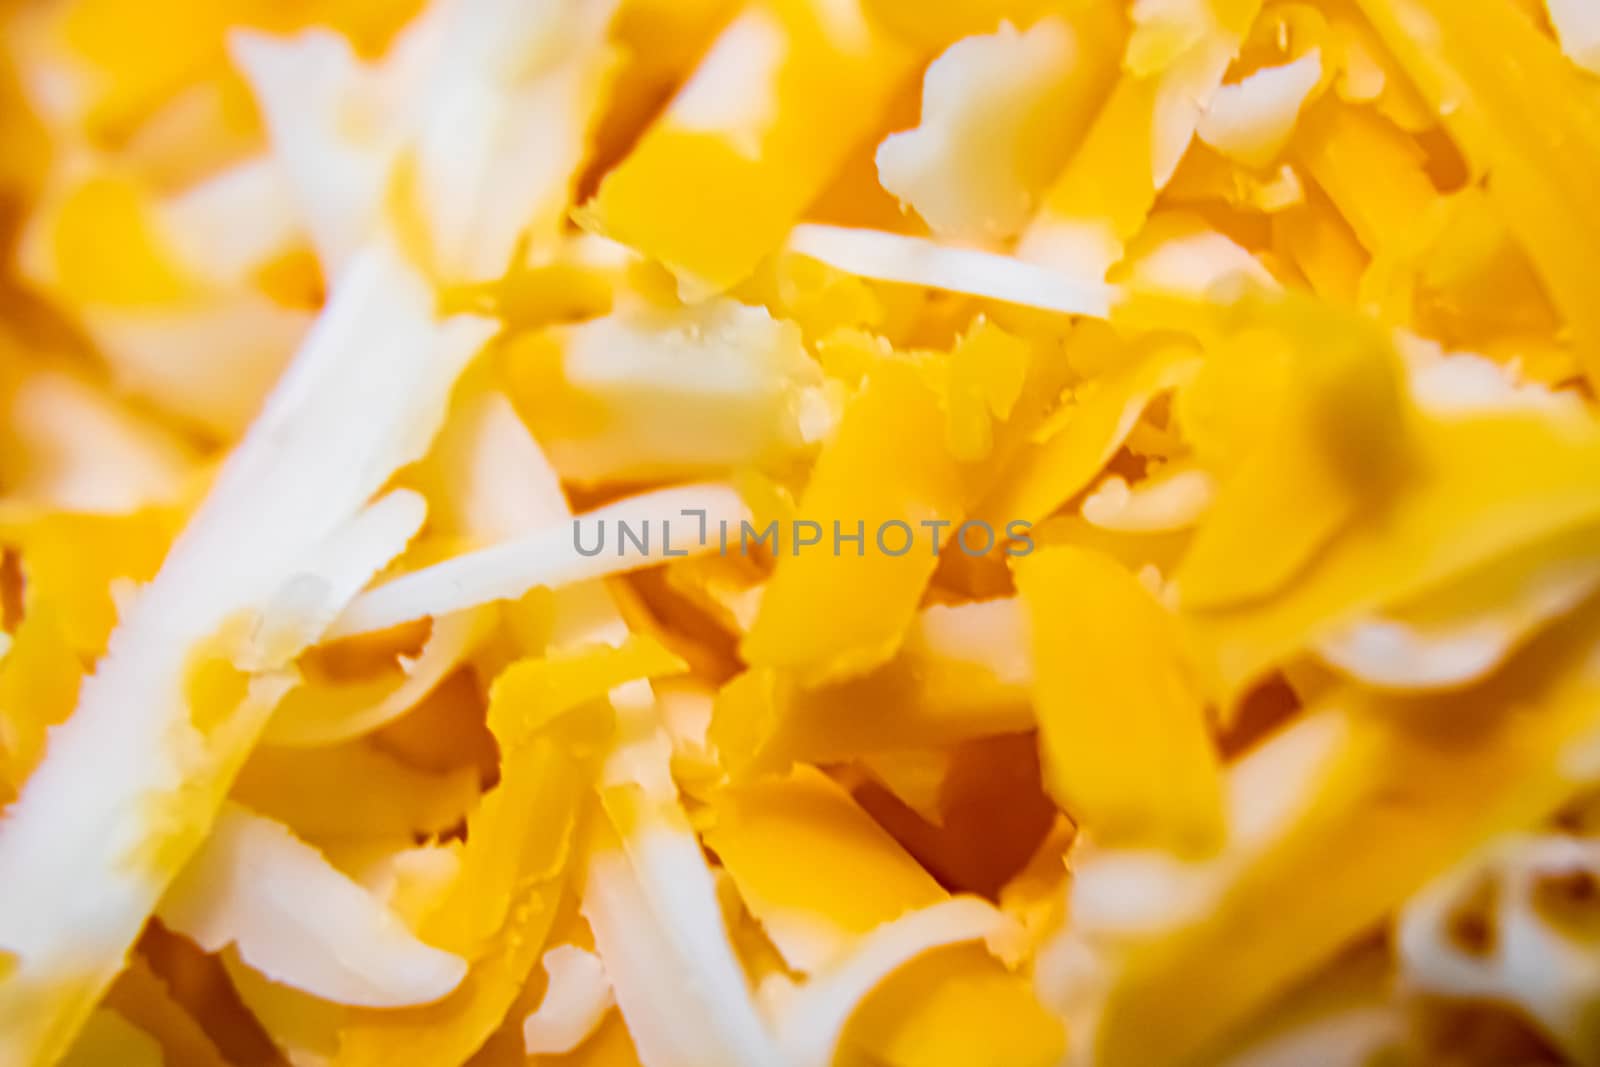 A close-up view of shredded farmer's marble cheddar cheese, showing the detail and color of the food.